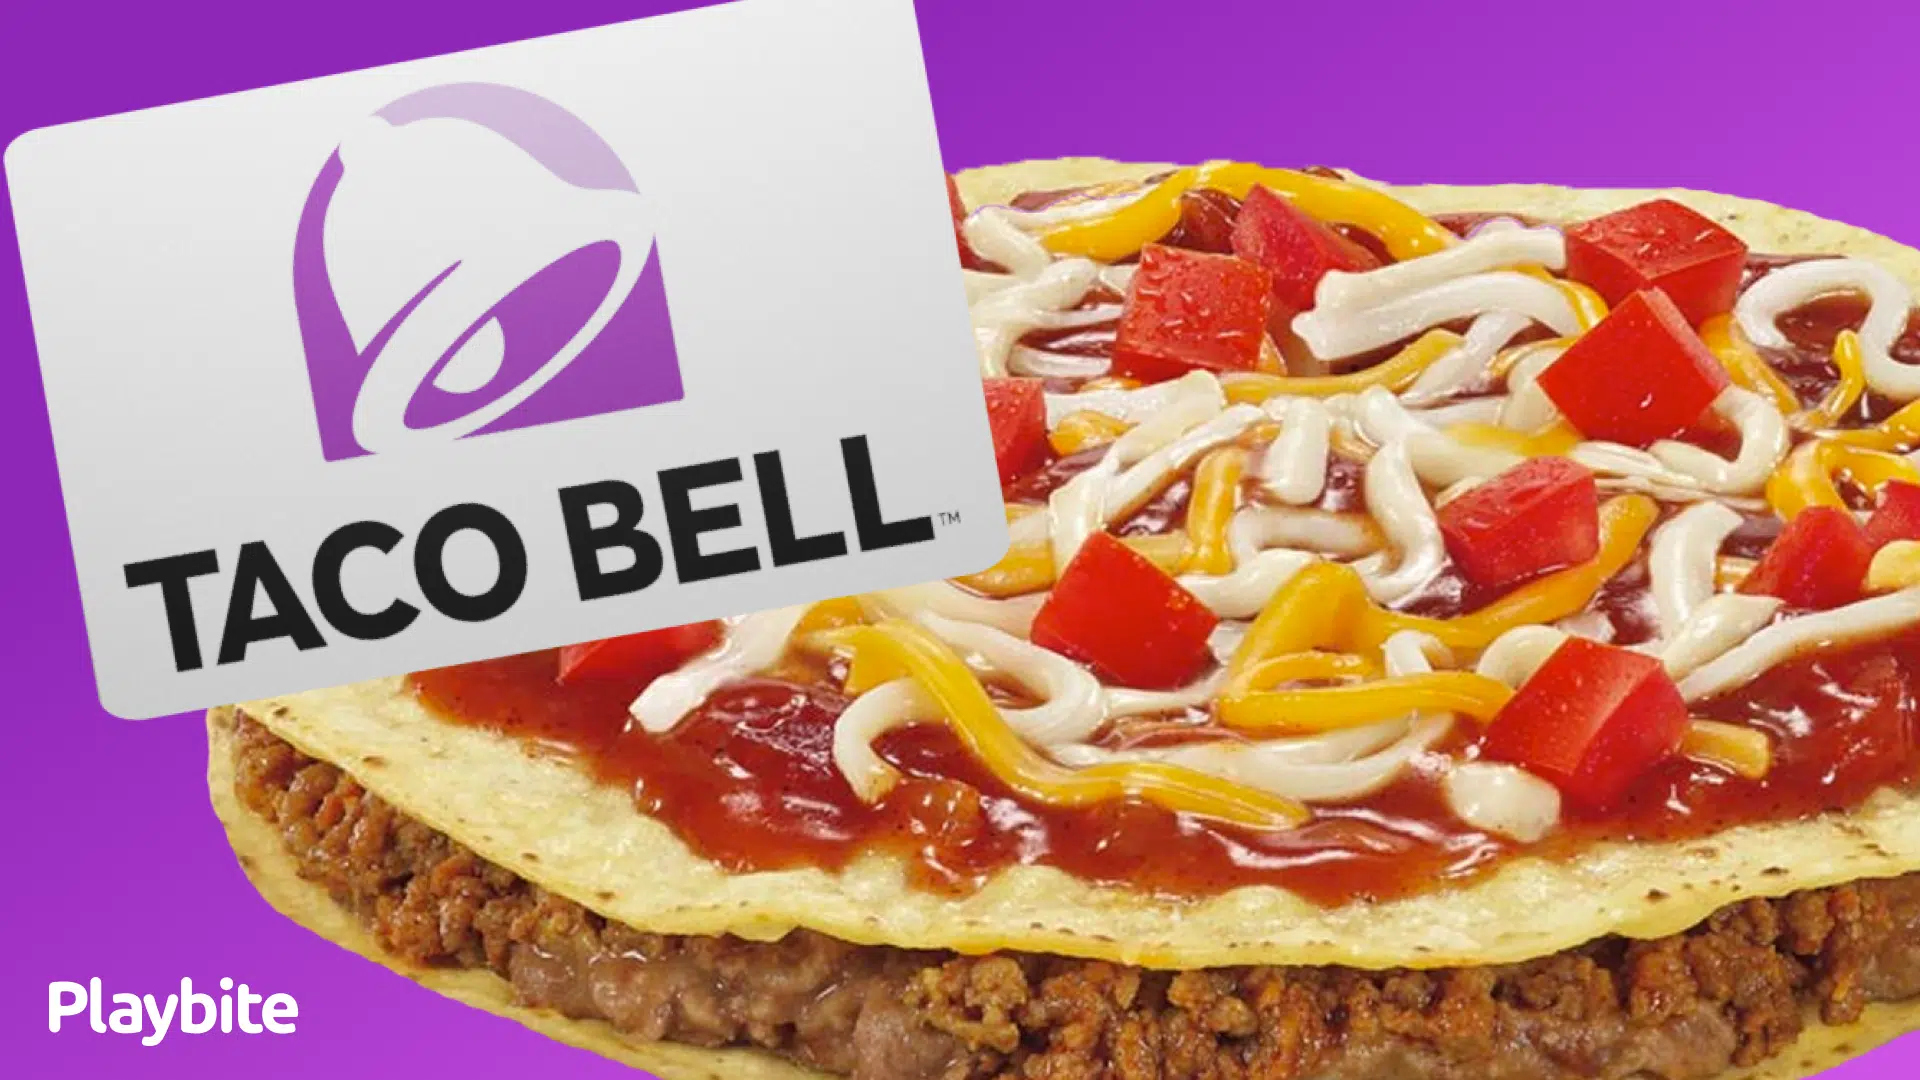 The Taco Bell Mexican Pizza